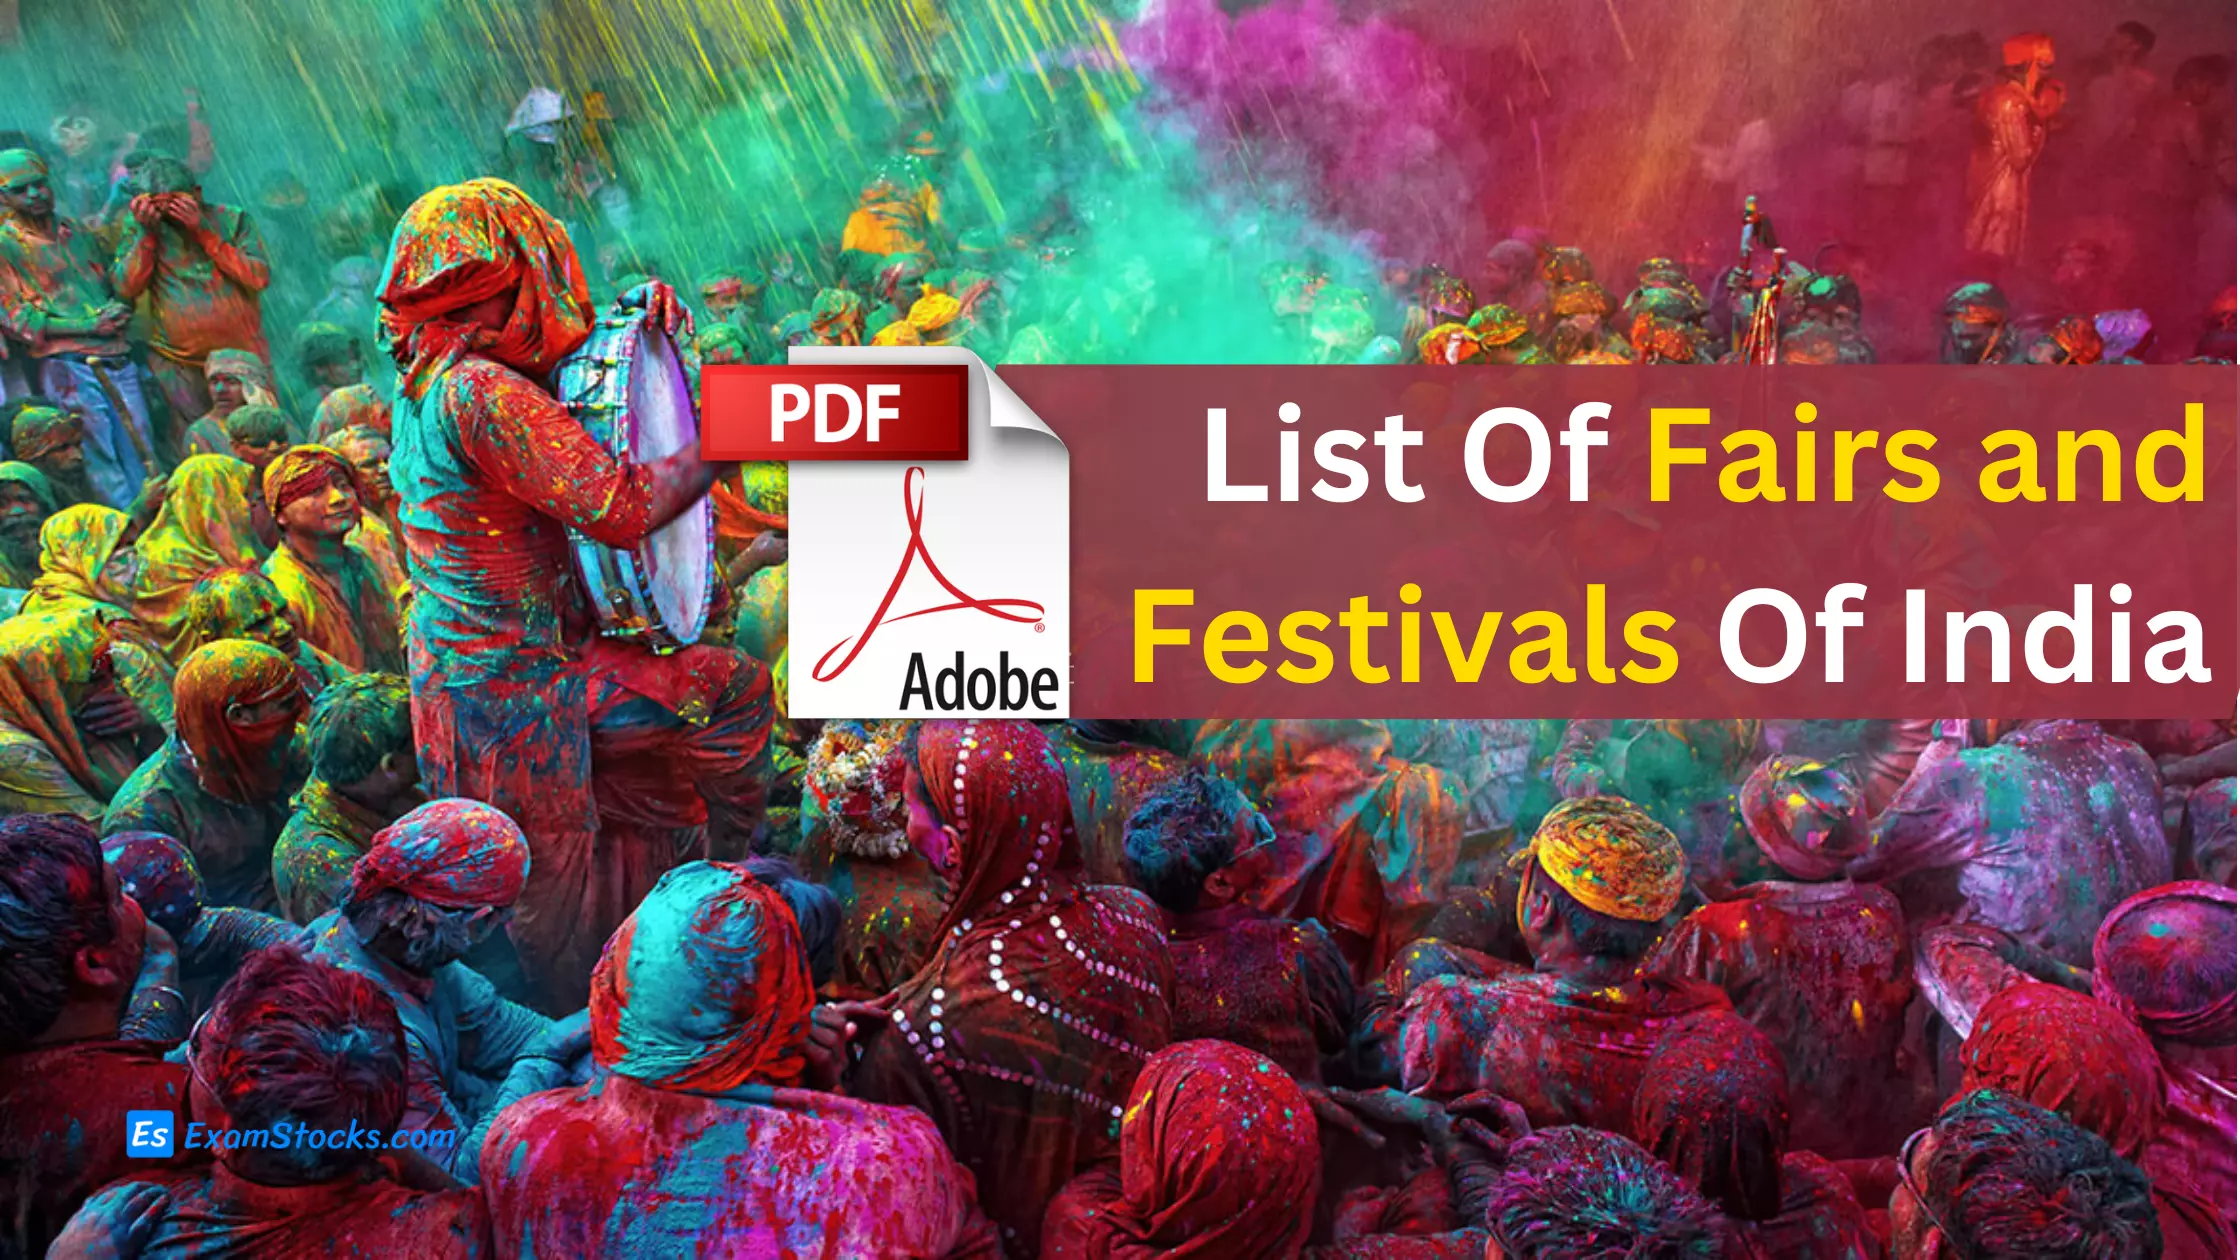 List Of Fairs and Festivals Of India PDF